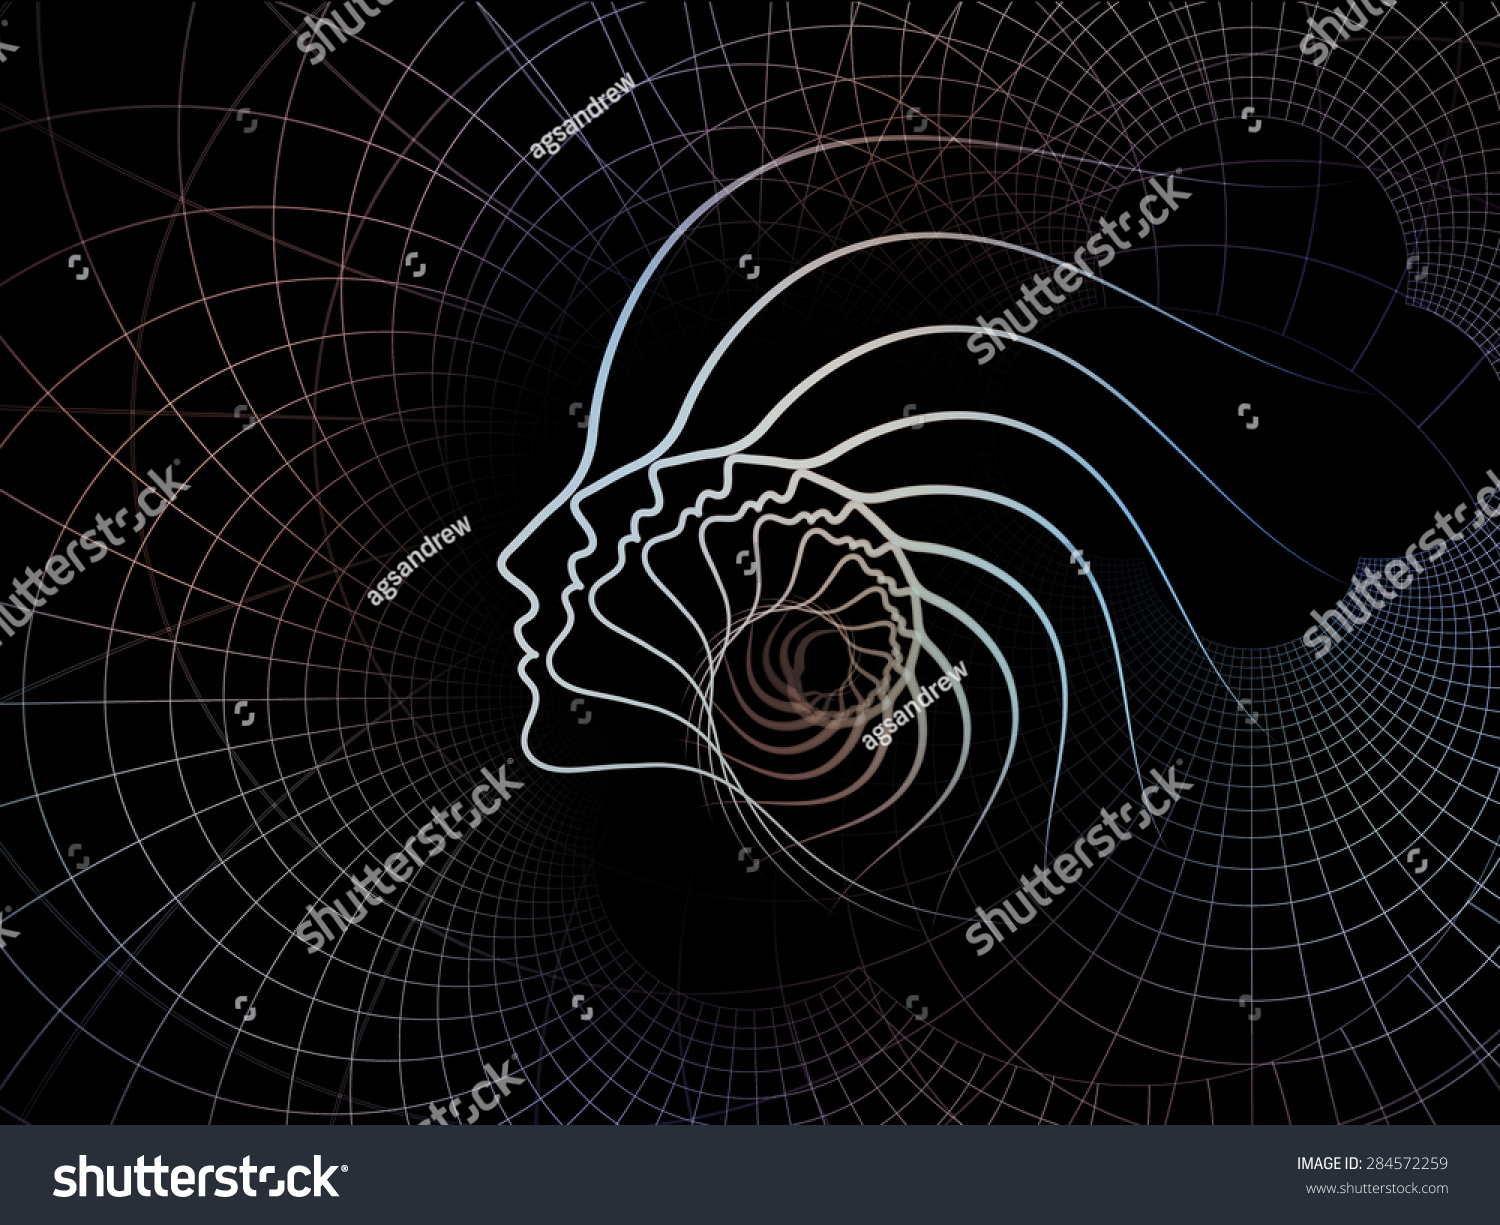 Geometry of Soul series. Abstract design made of profile lines of human head on the subject of education, science, technology and graphic design #284572259